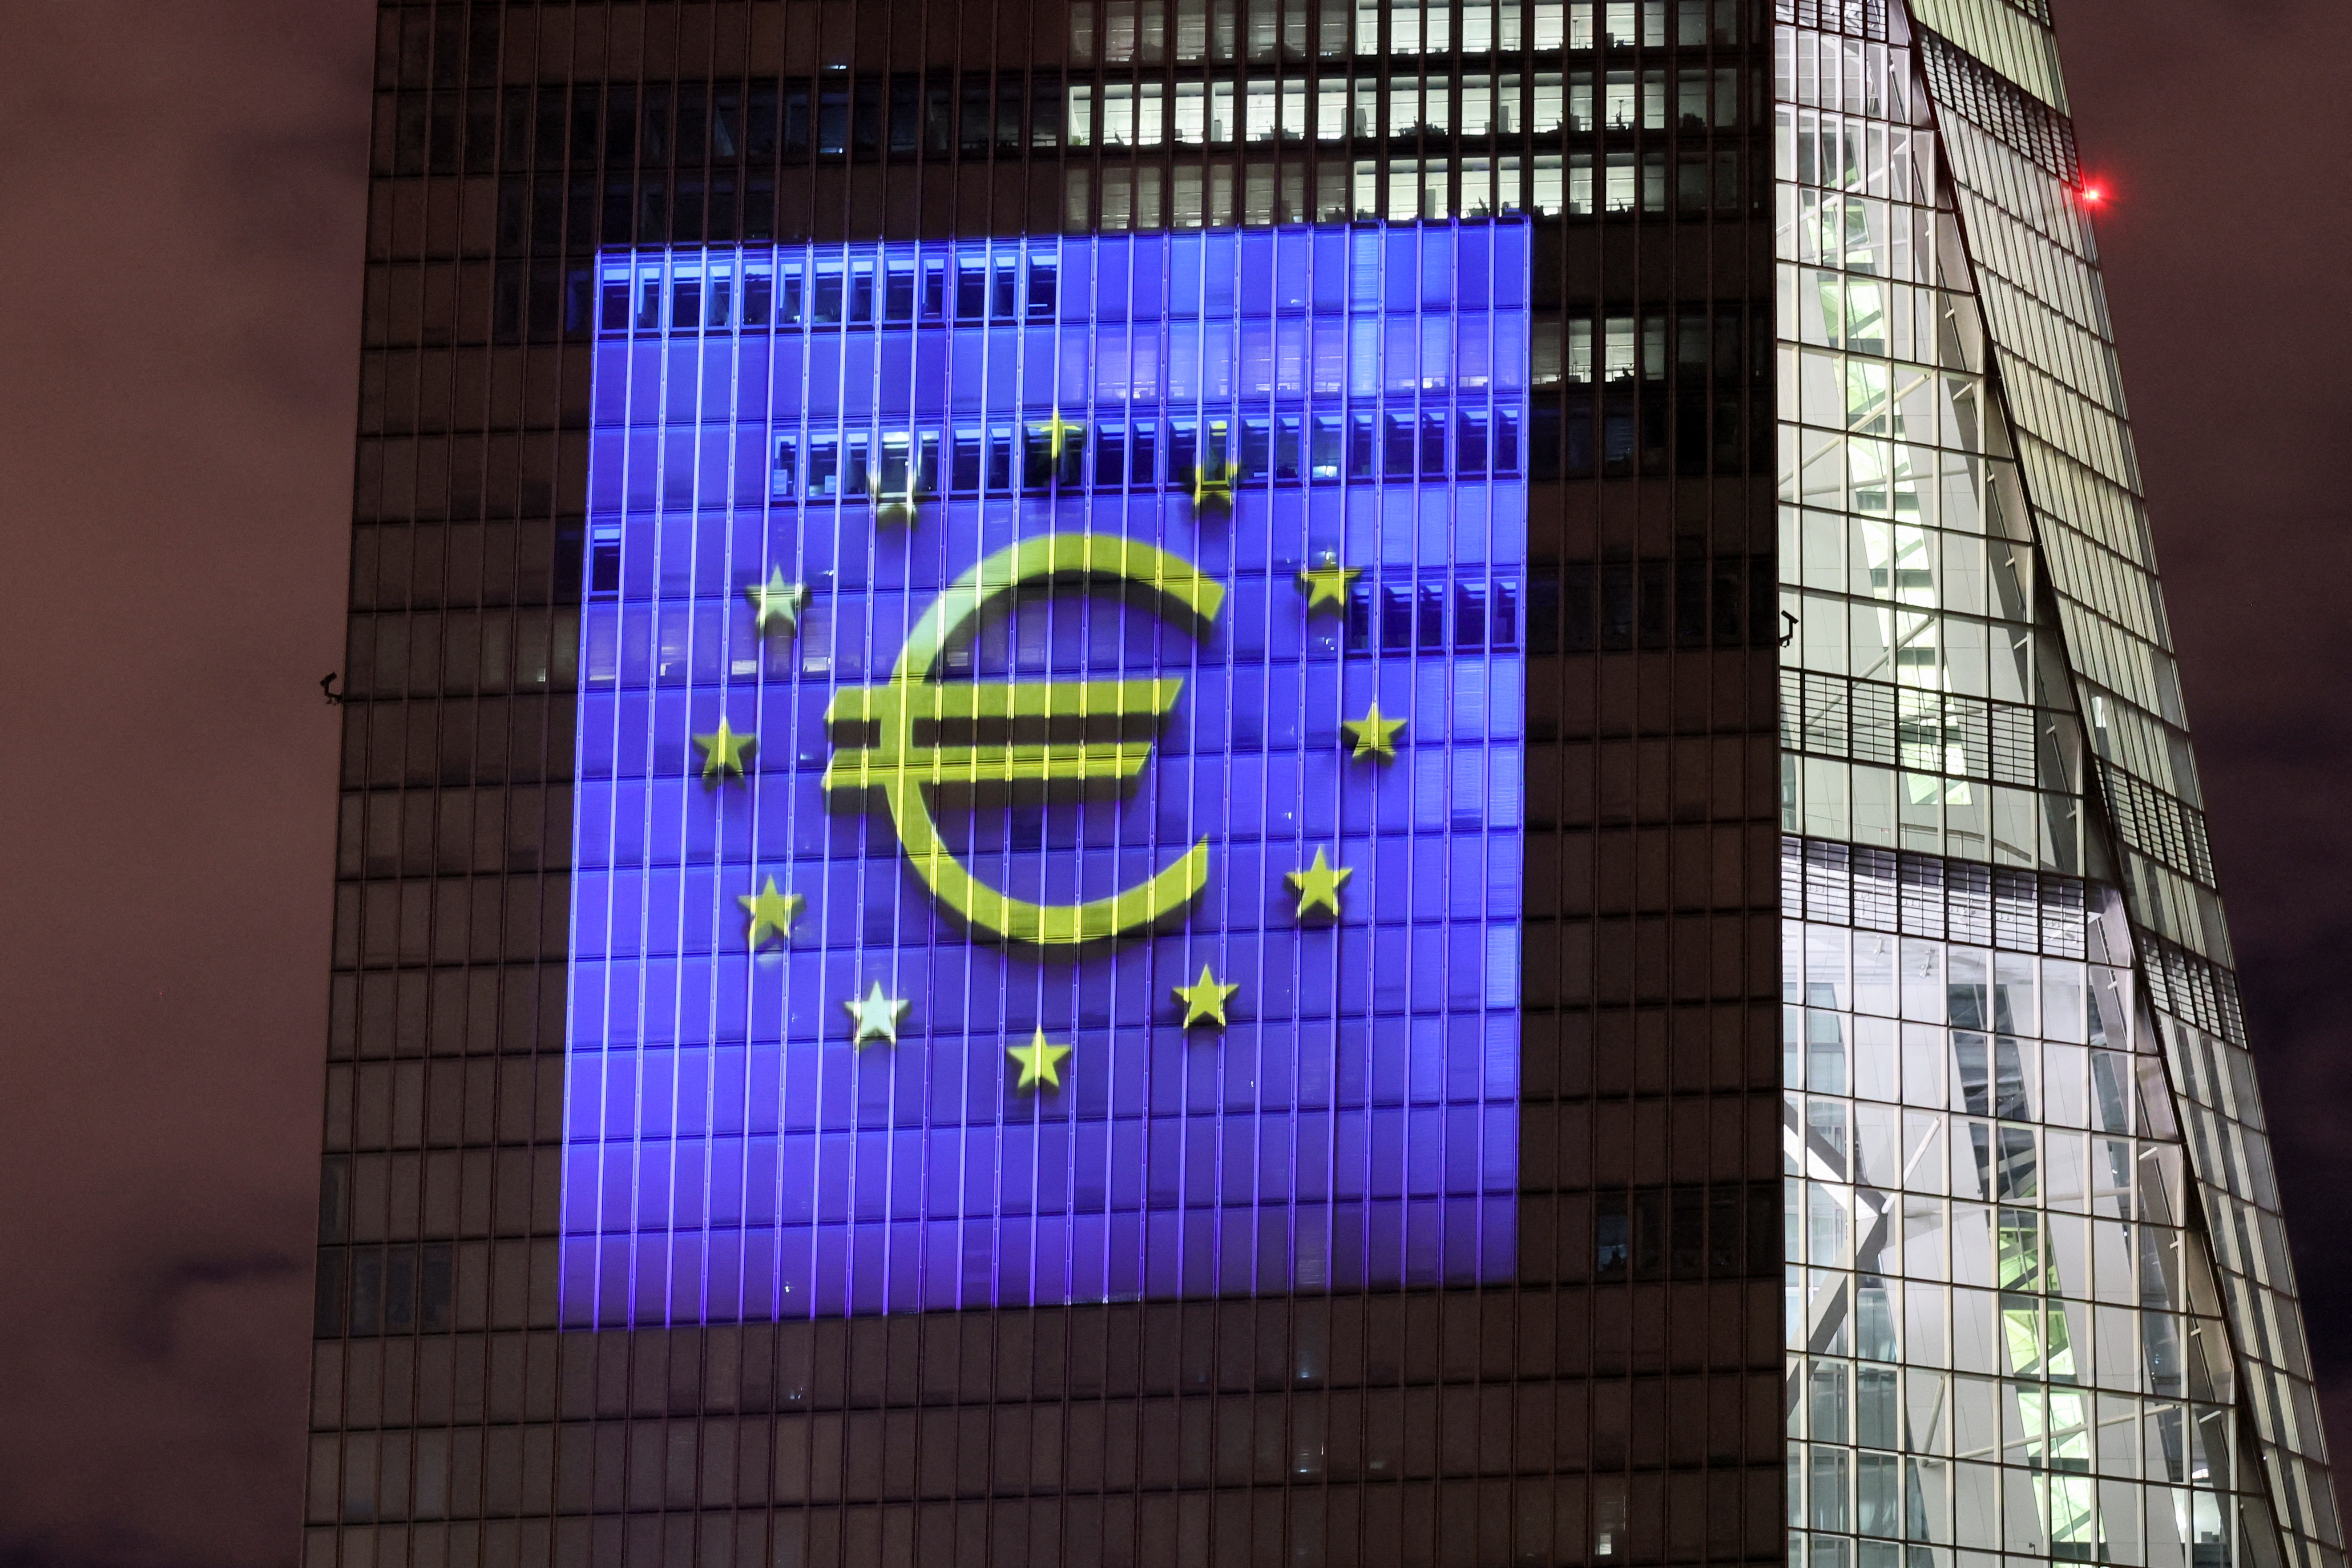 Preview of the illumination at ECB headquarters for the Euro's 20th anniversary in Frankfurt